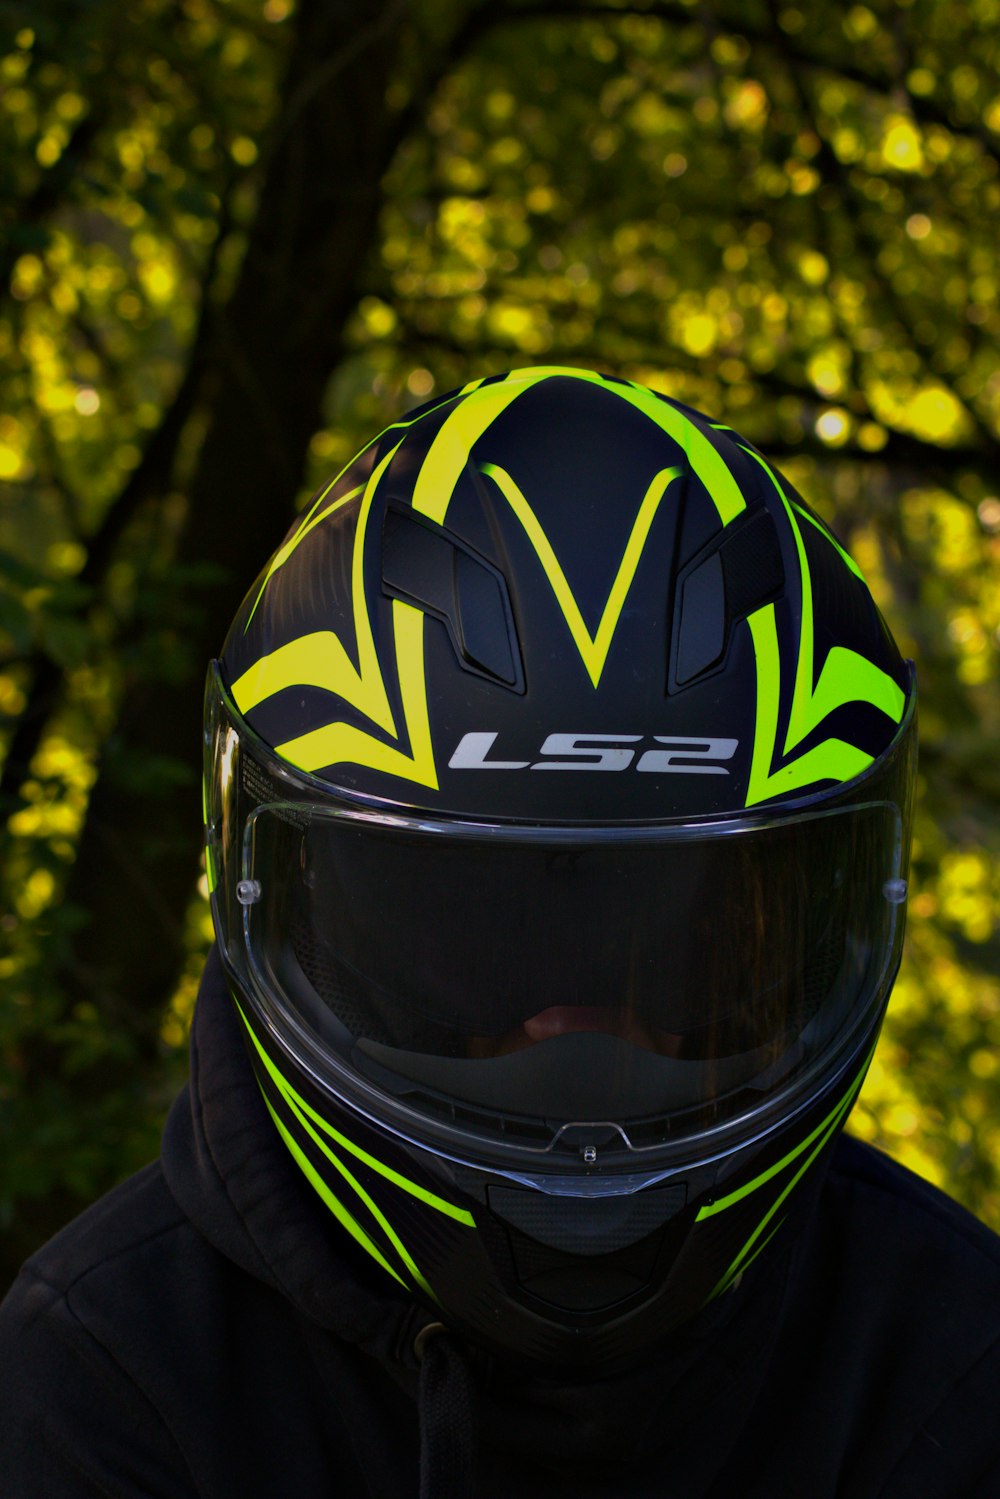 person wearing black and yellow helmet